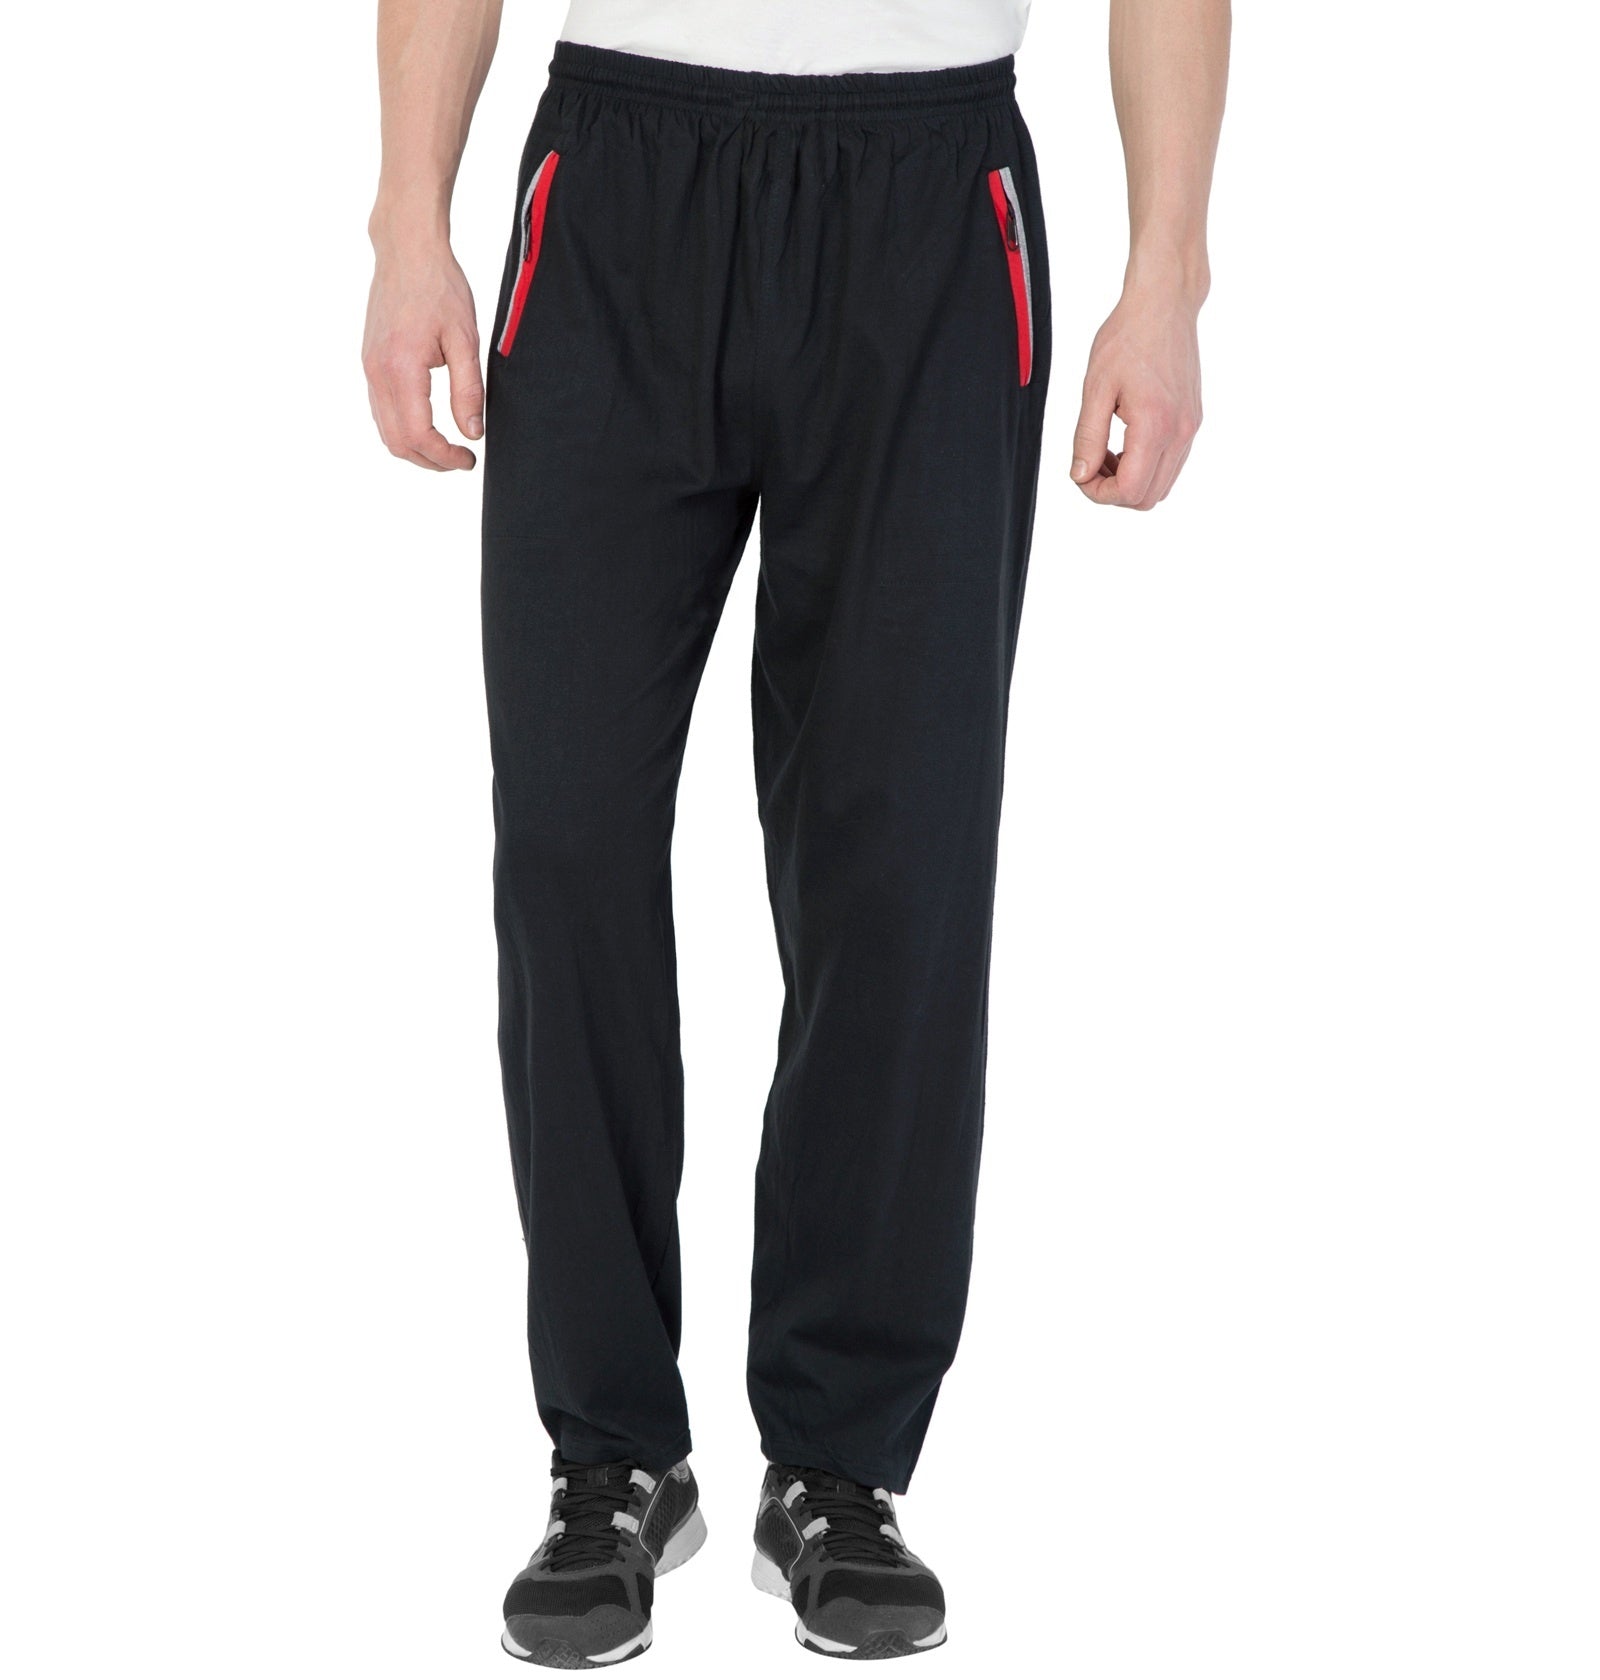 Style 927-C- Men's Flex Pant. Men's workout pants with built-in cell phone  pocket. Made in America | Physique Bodyware Workout and Bodybuilding  clothing